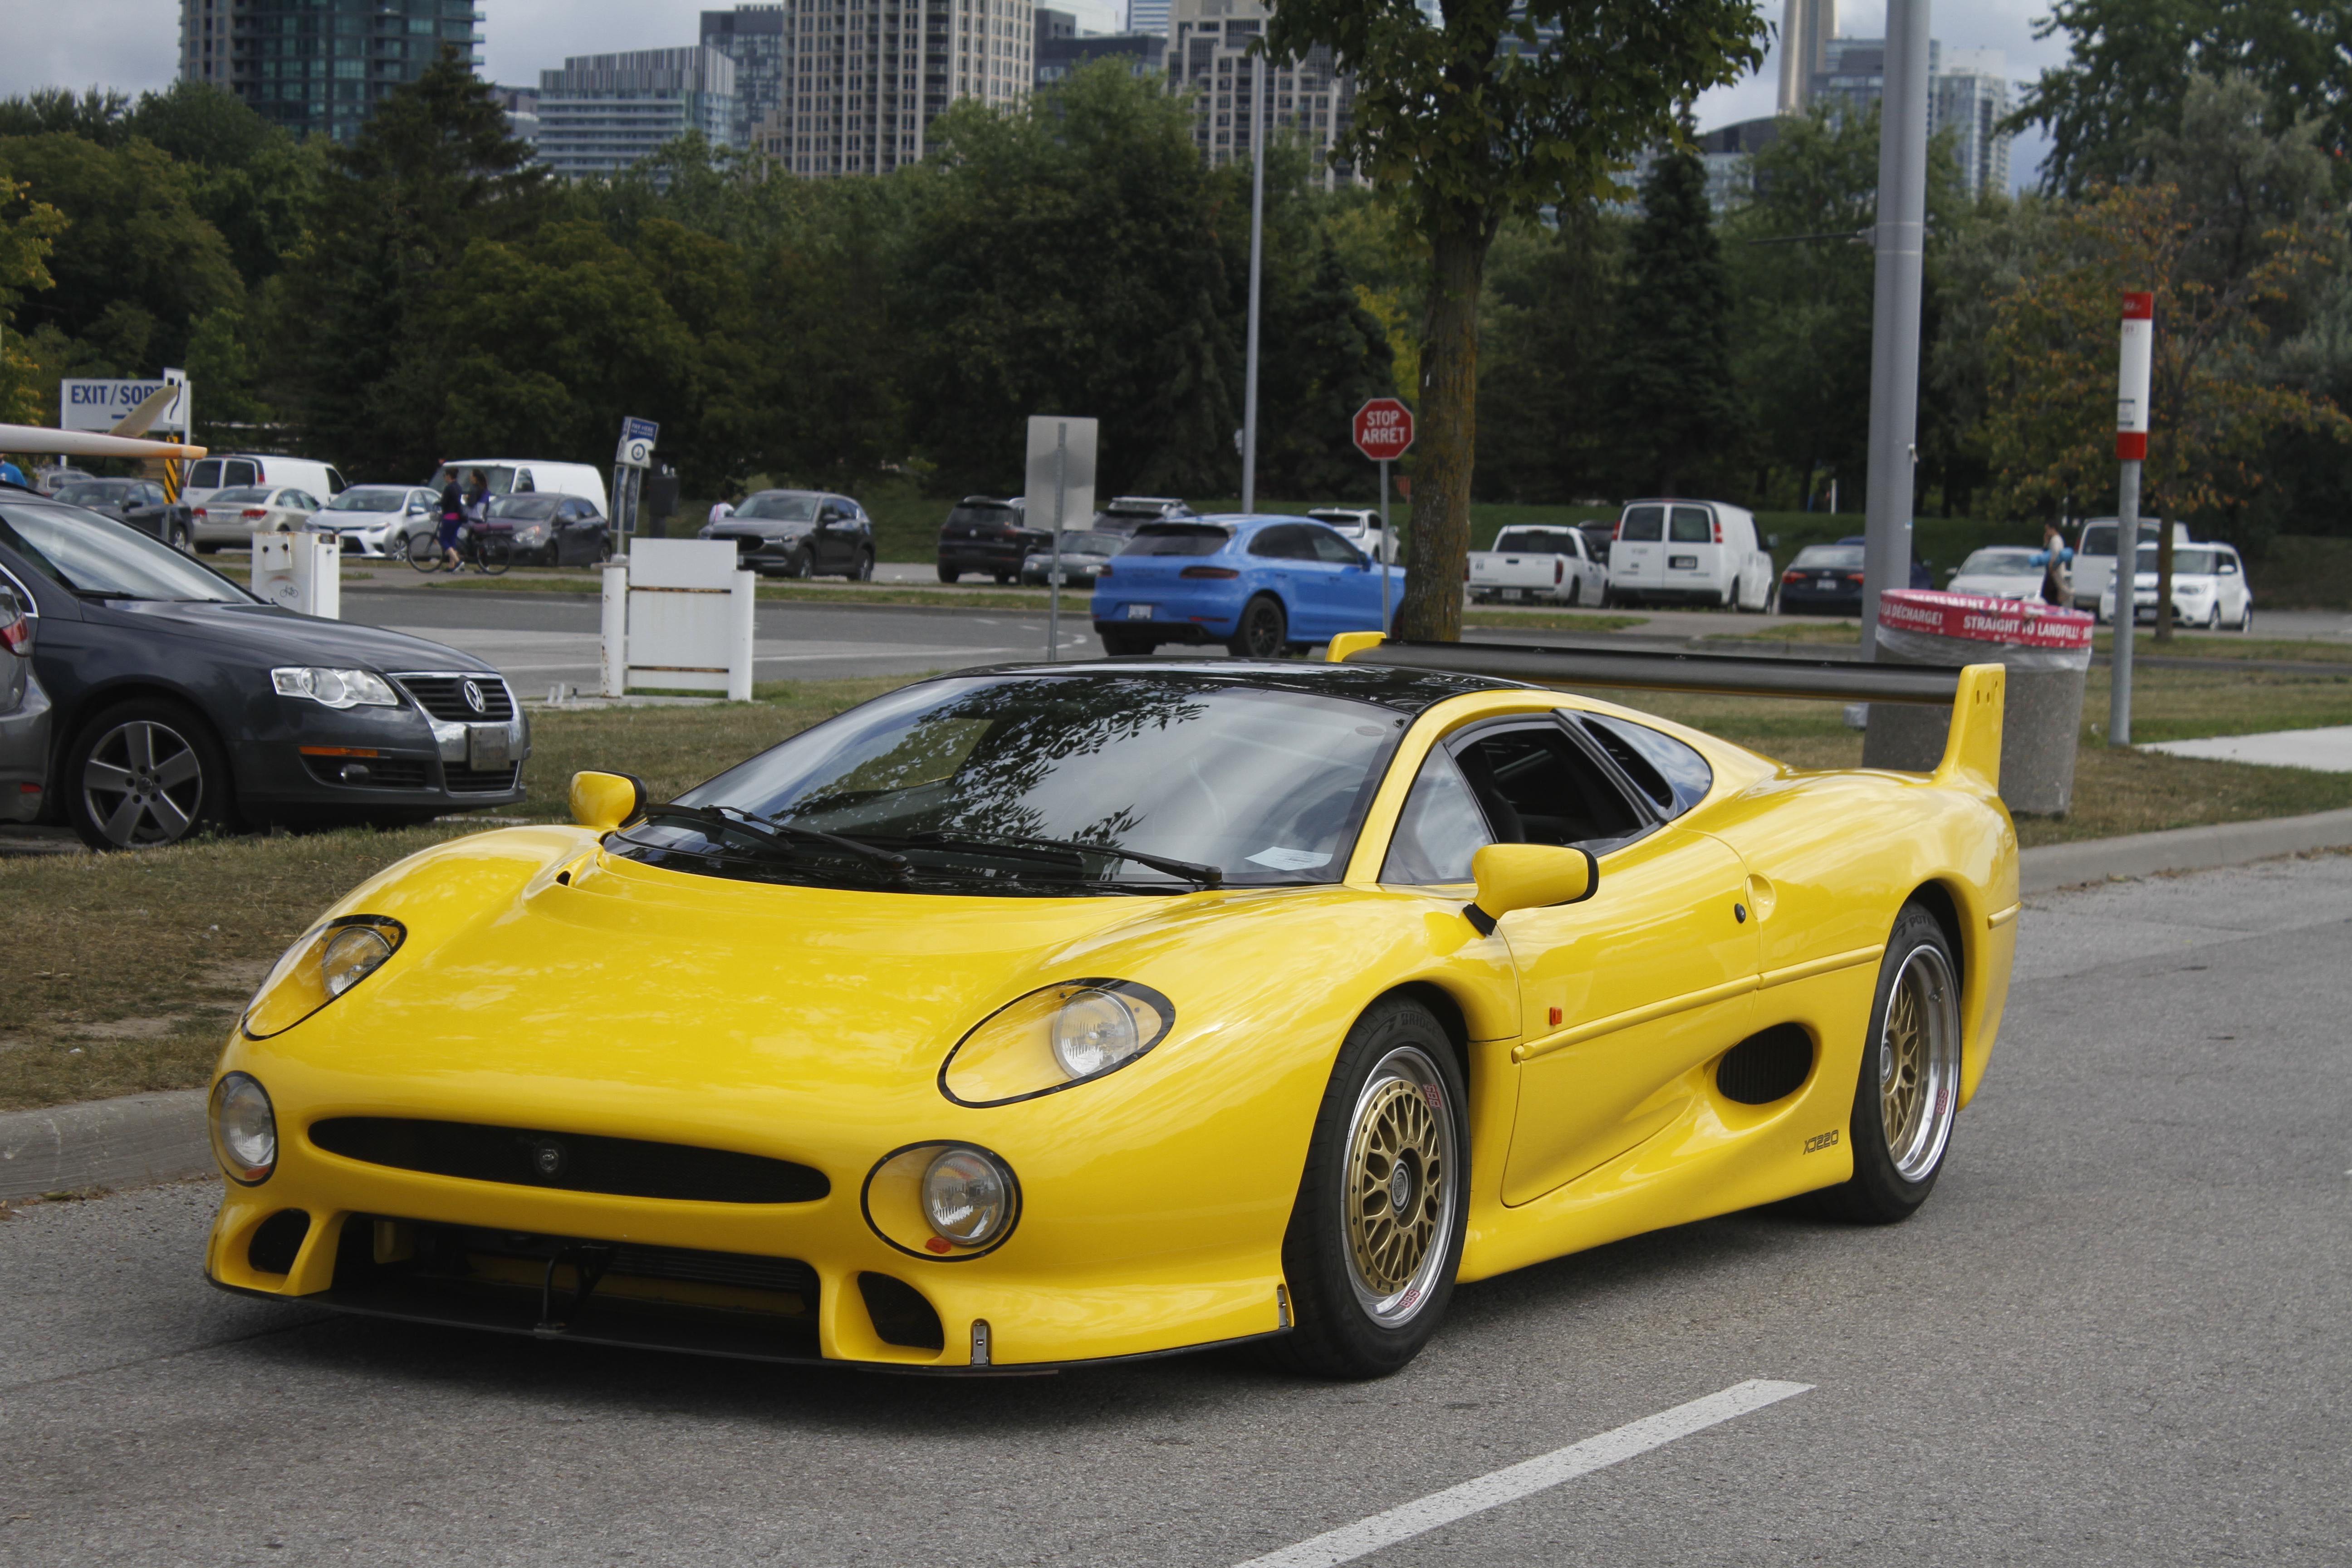 An extremely rare Jaguar XJ220S at Ontario Place